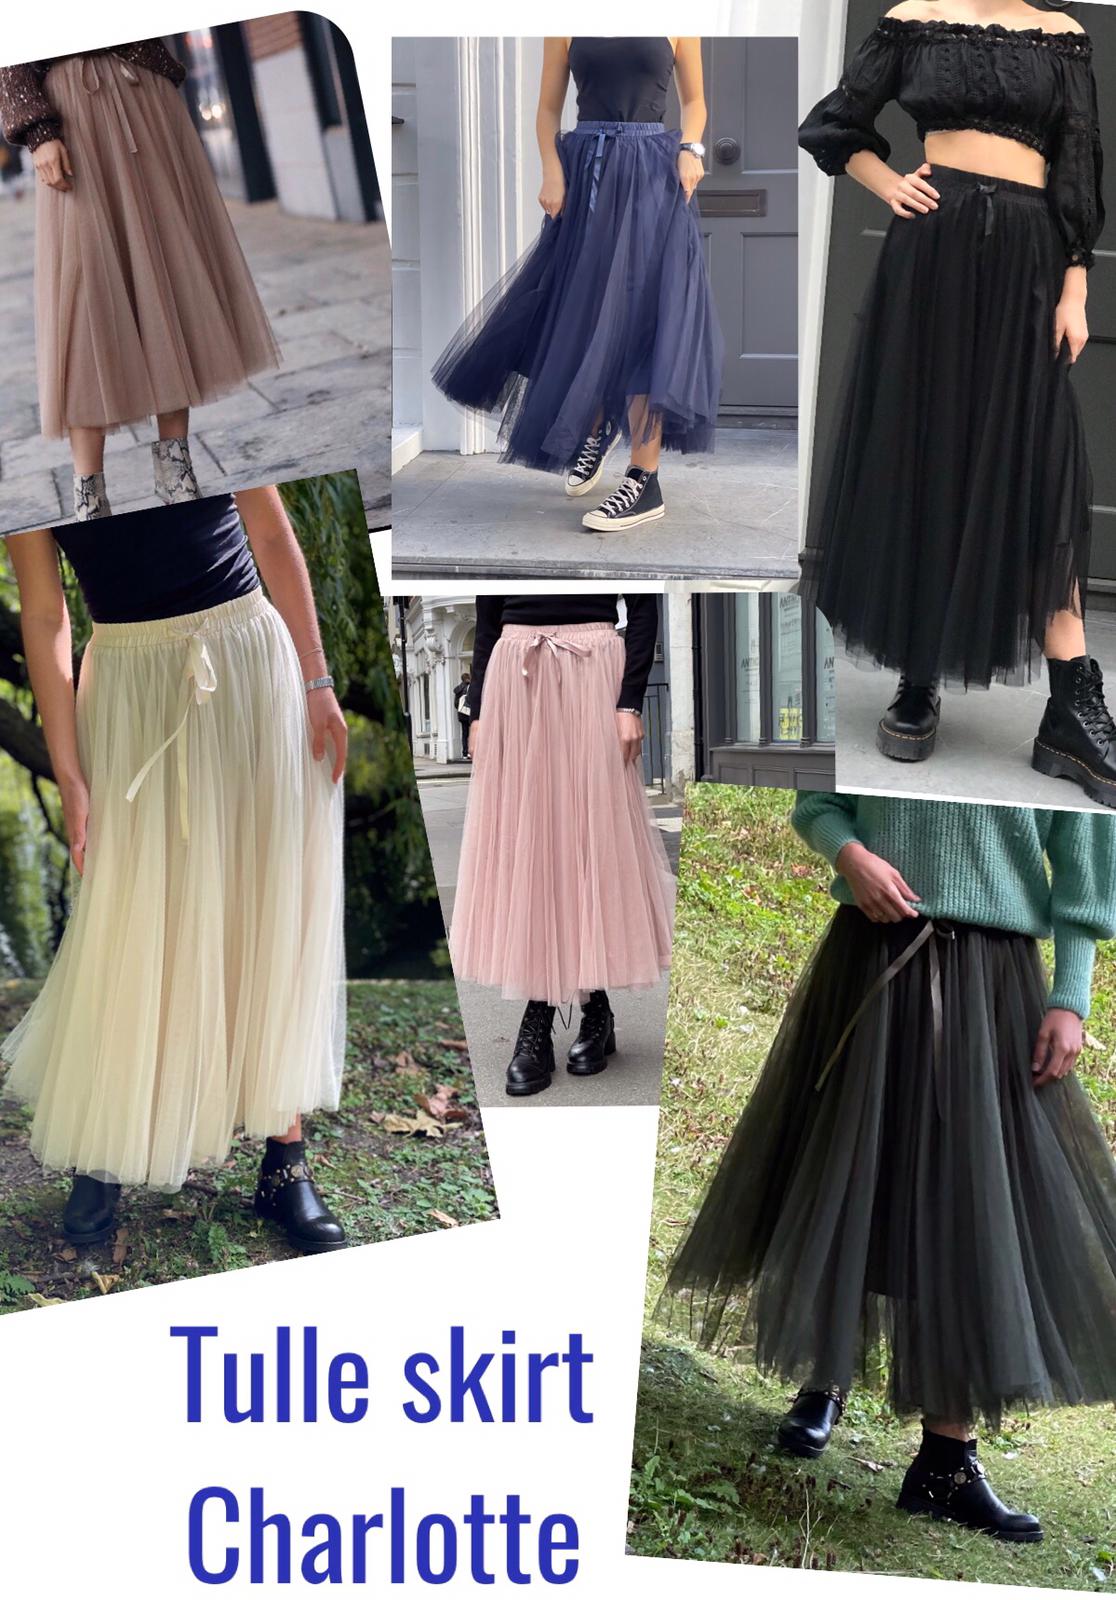 Find The Light Tulle Skirt • Impressions Online Boutique